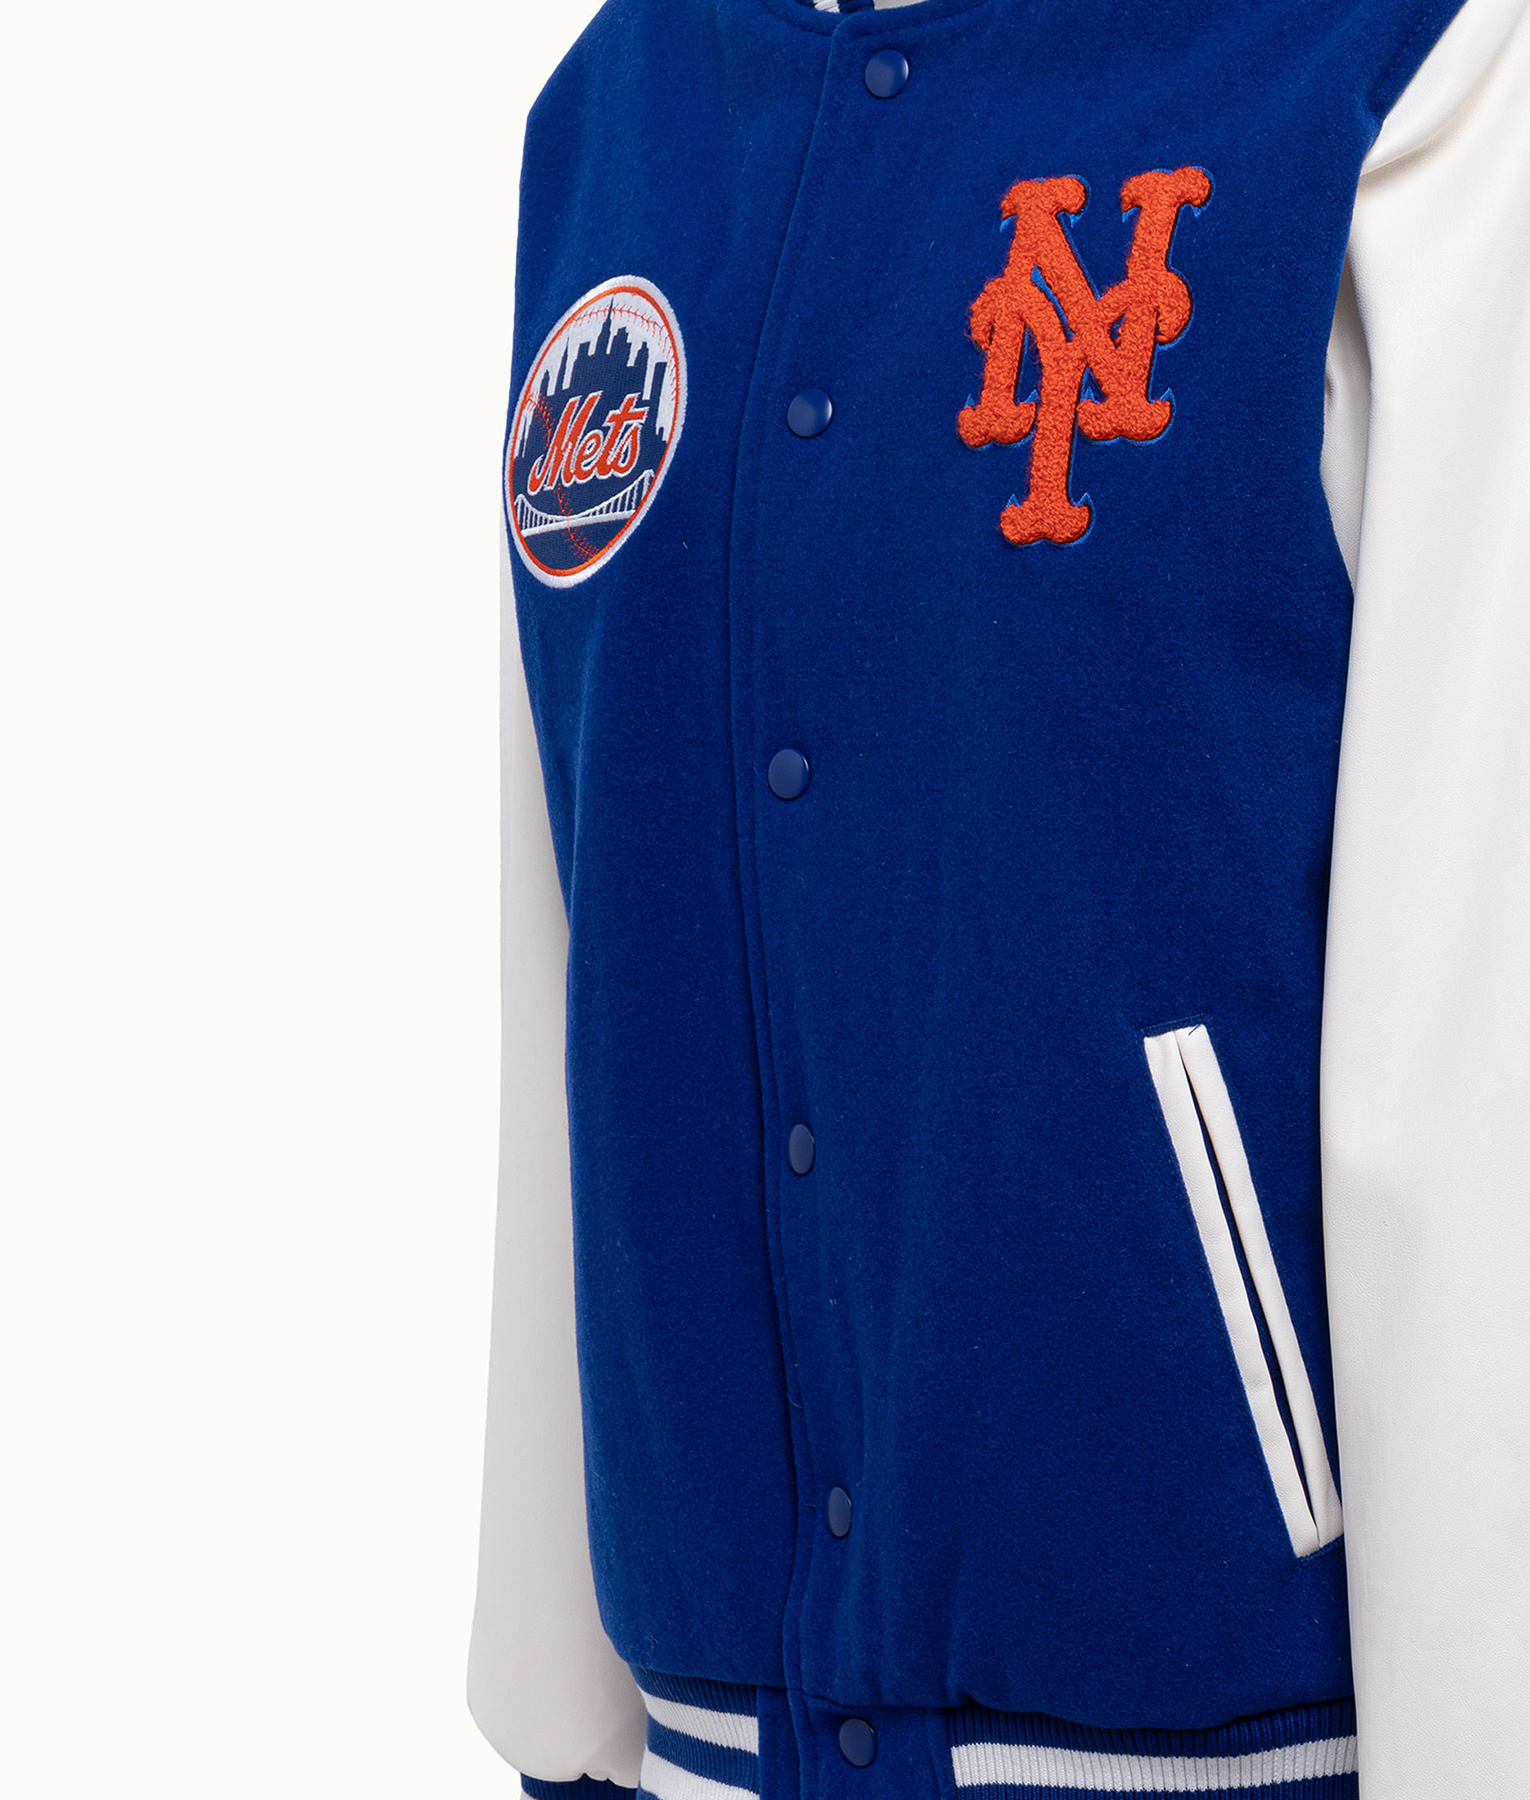 Blue and White Mets Varsity Jacket (2)